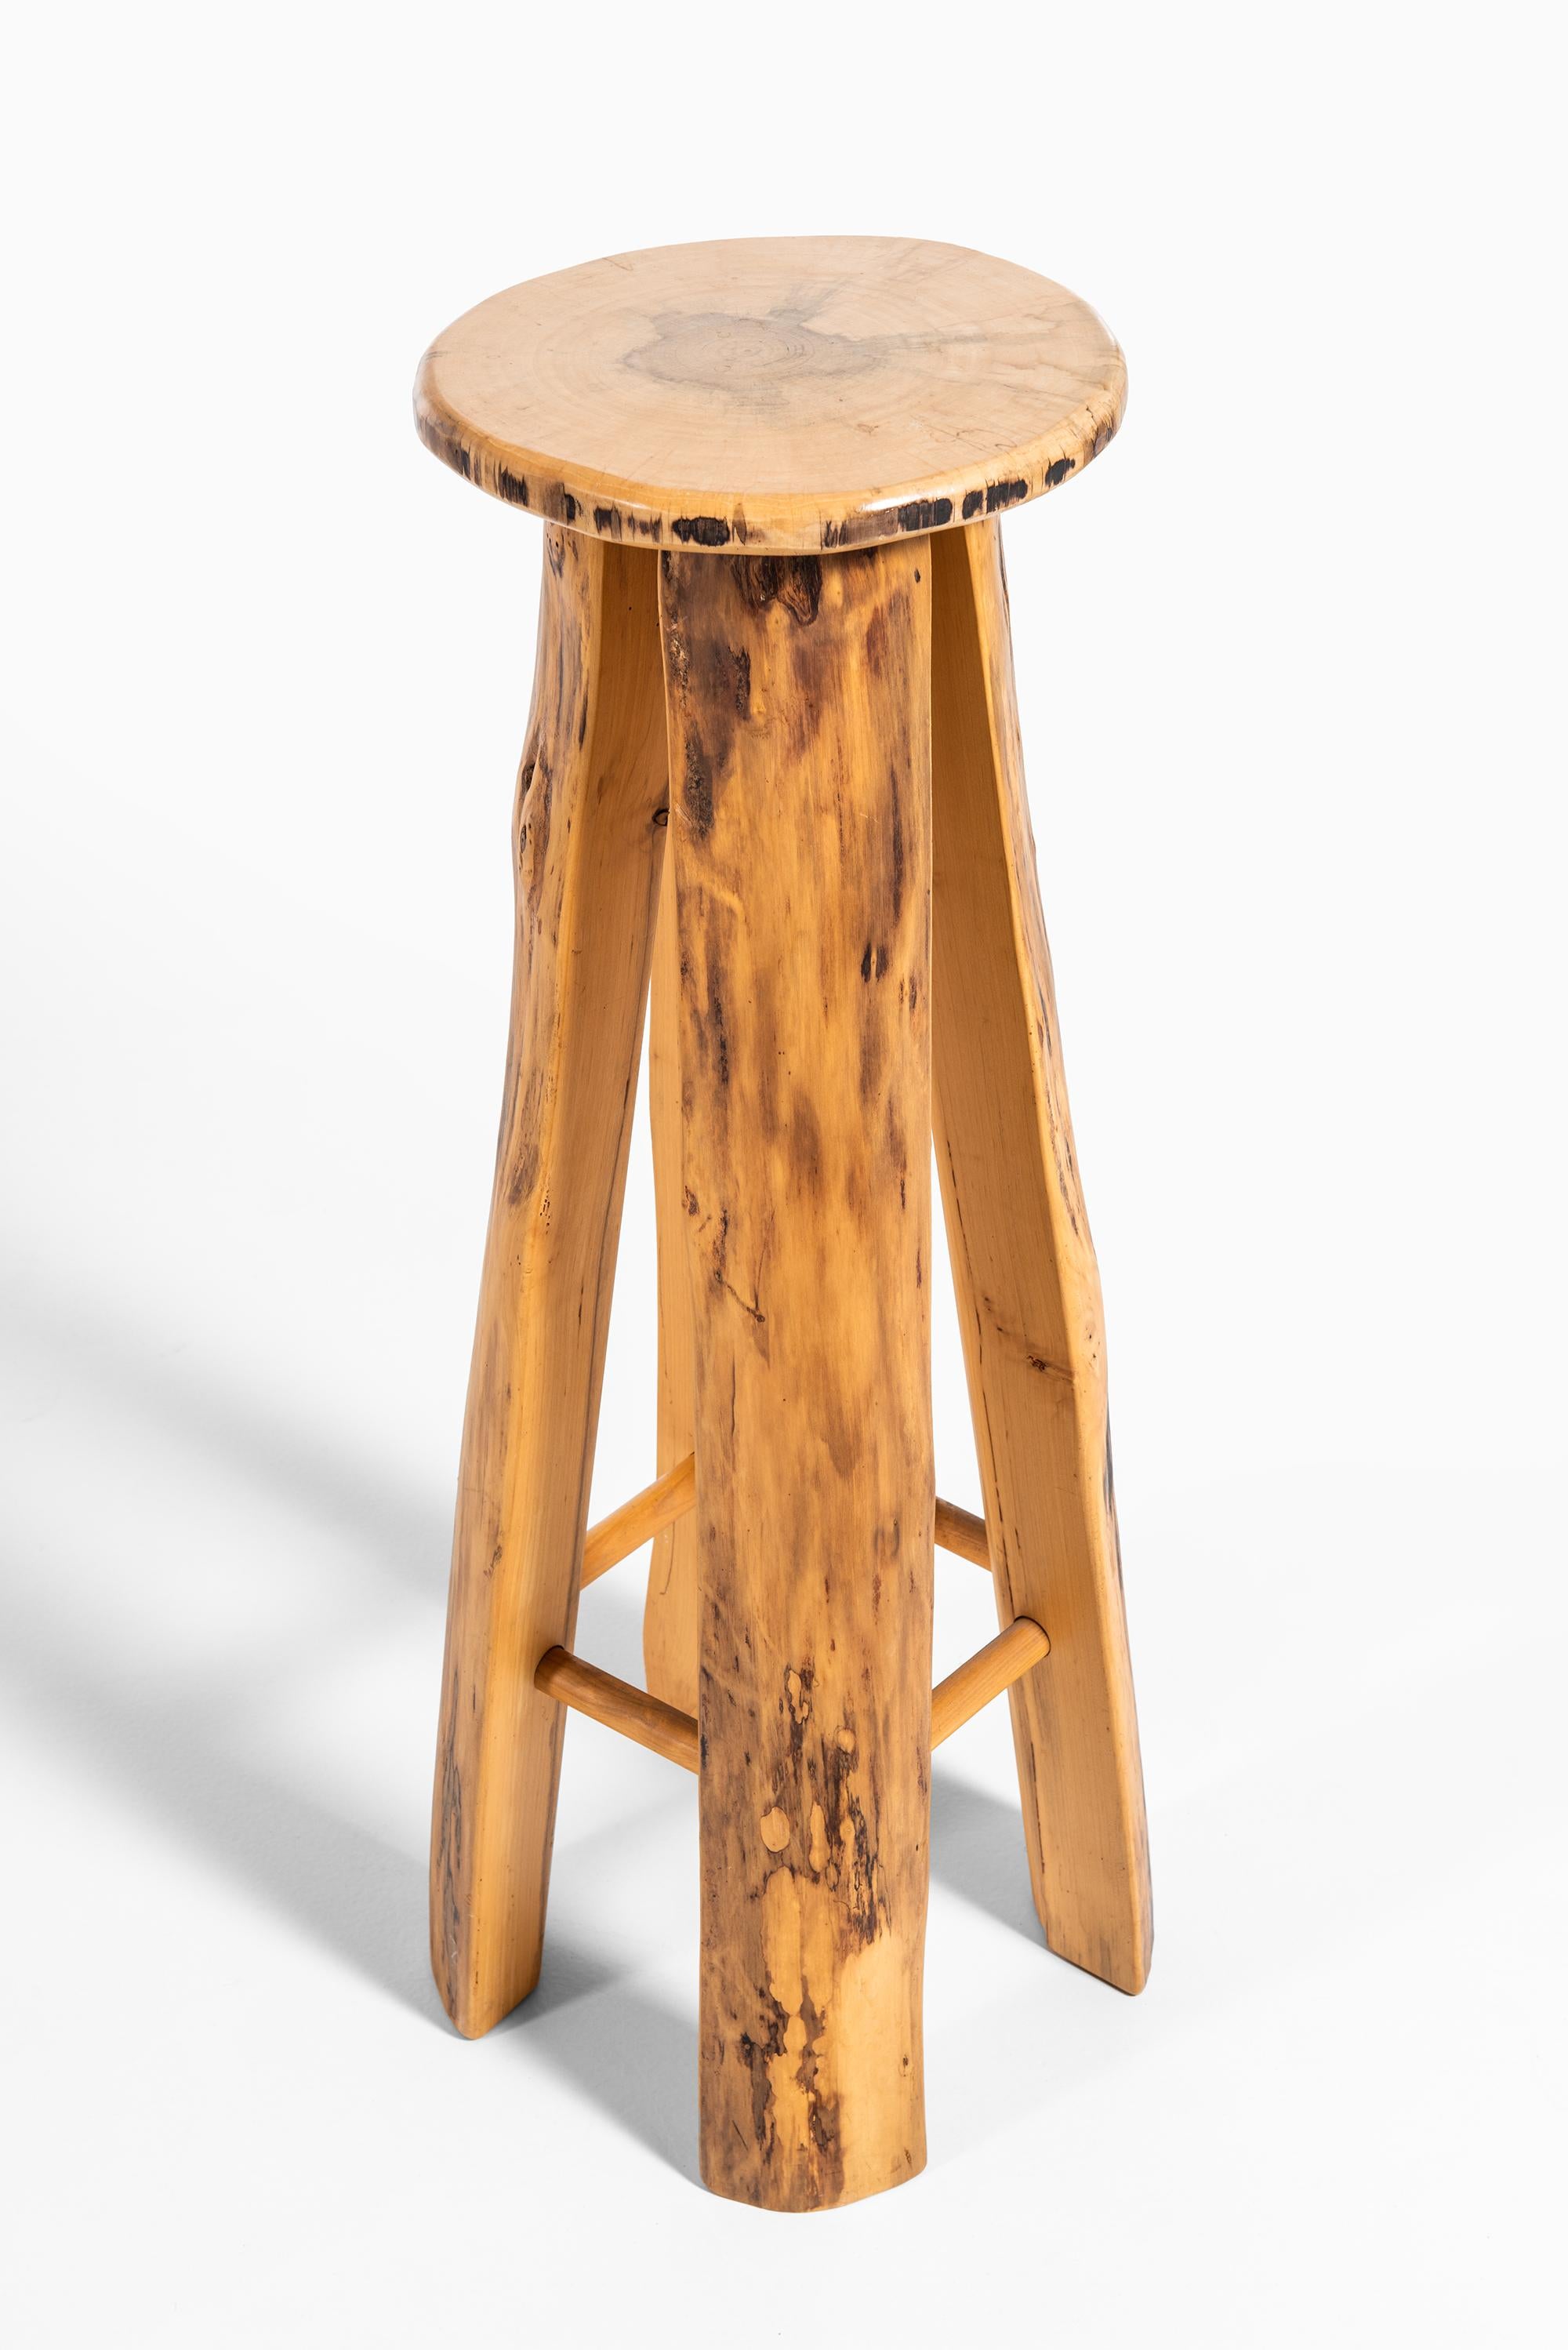 Mid-20th Century Sigvard Nilsson Bar Stools in Poplar Produced by Söwe in Sweden For Sale